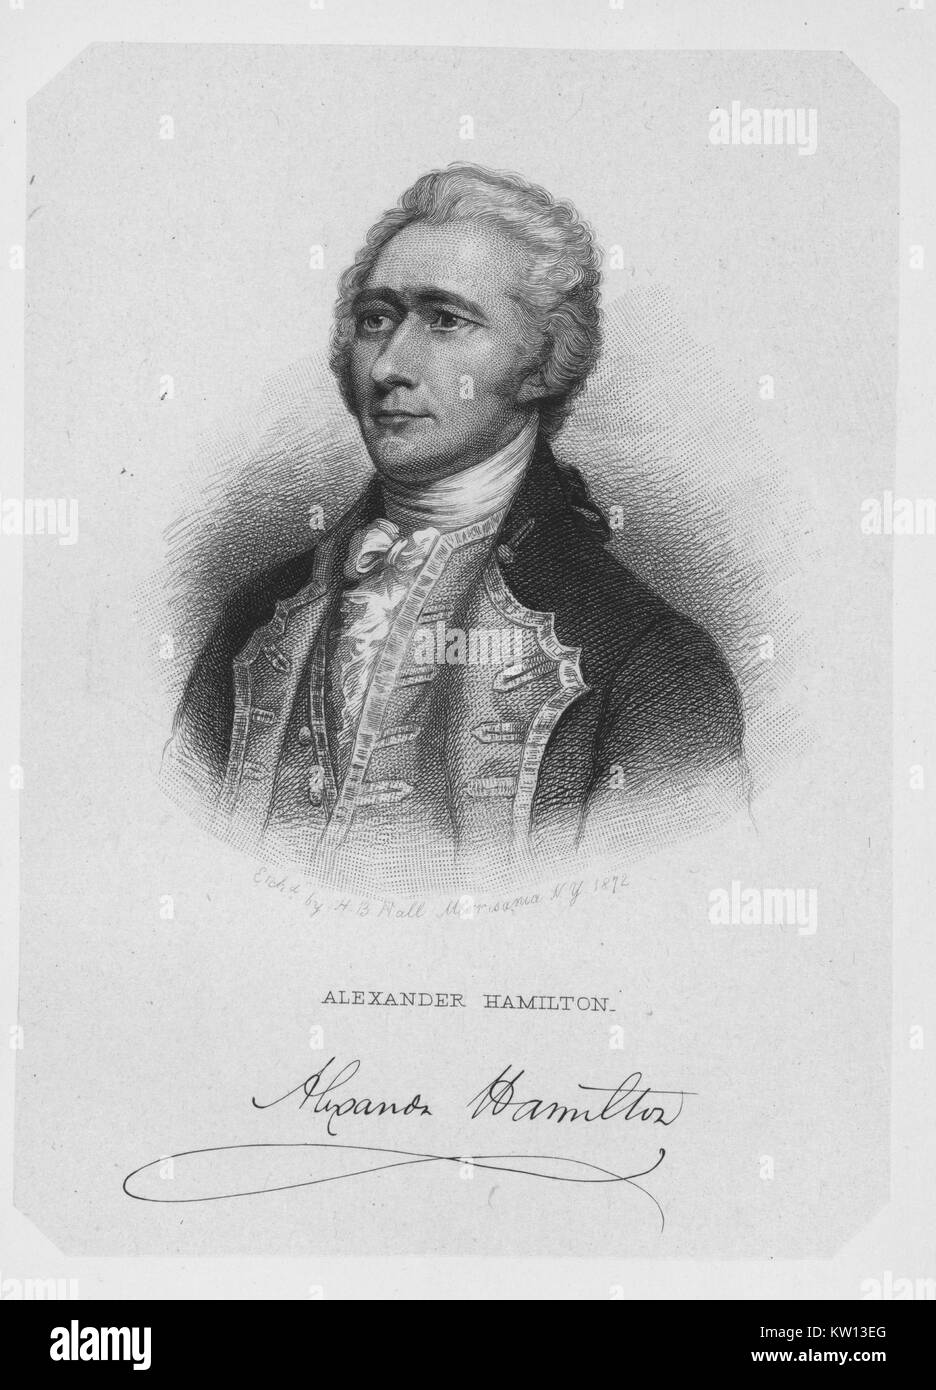 An etching from a portrait of Alexander Hamilton, he was one of the Founding Fathers of the United States of America, served as chief staff aide to George Washington during the American Revolutionary War and was the first United States Secretary of the Treasury, the etching features a reproduction of Hamilton's signature, 1876. From the New York Public Library. Stock Photo